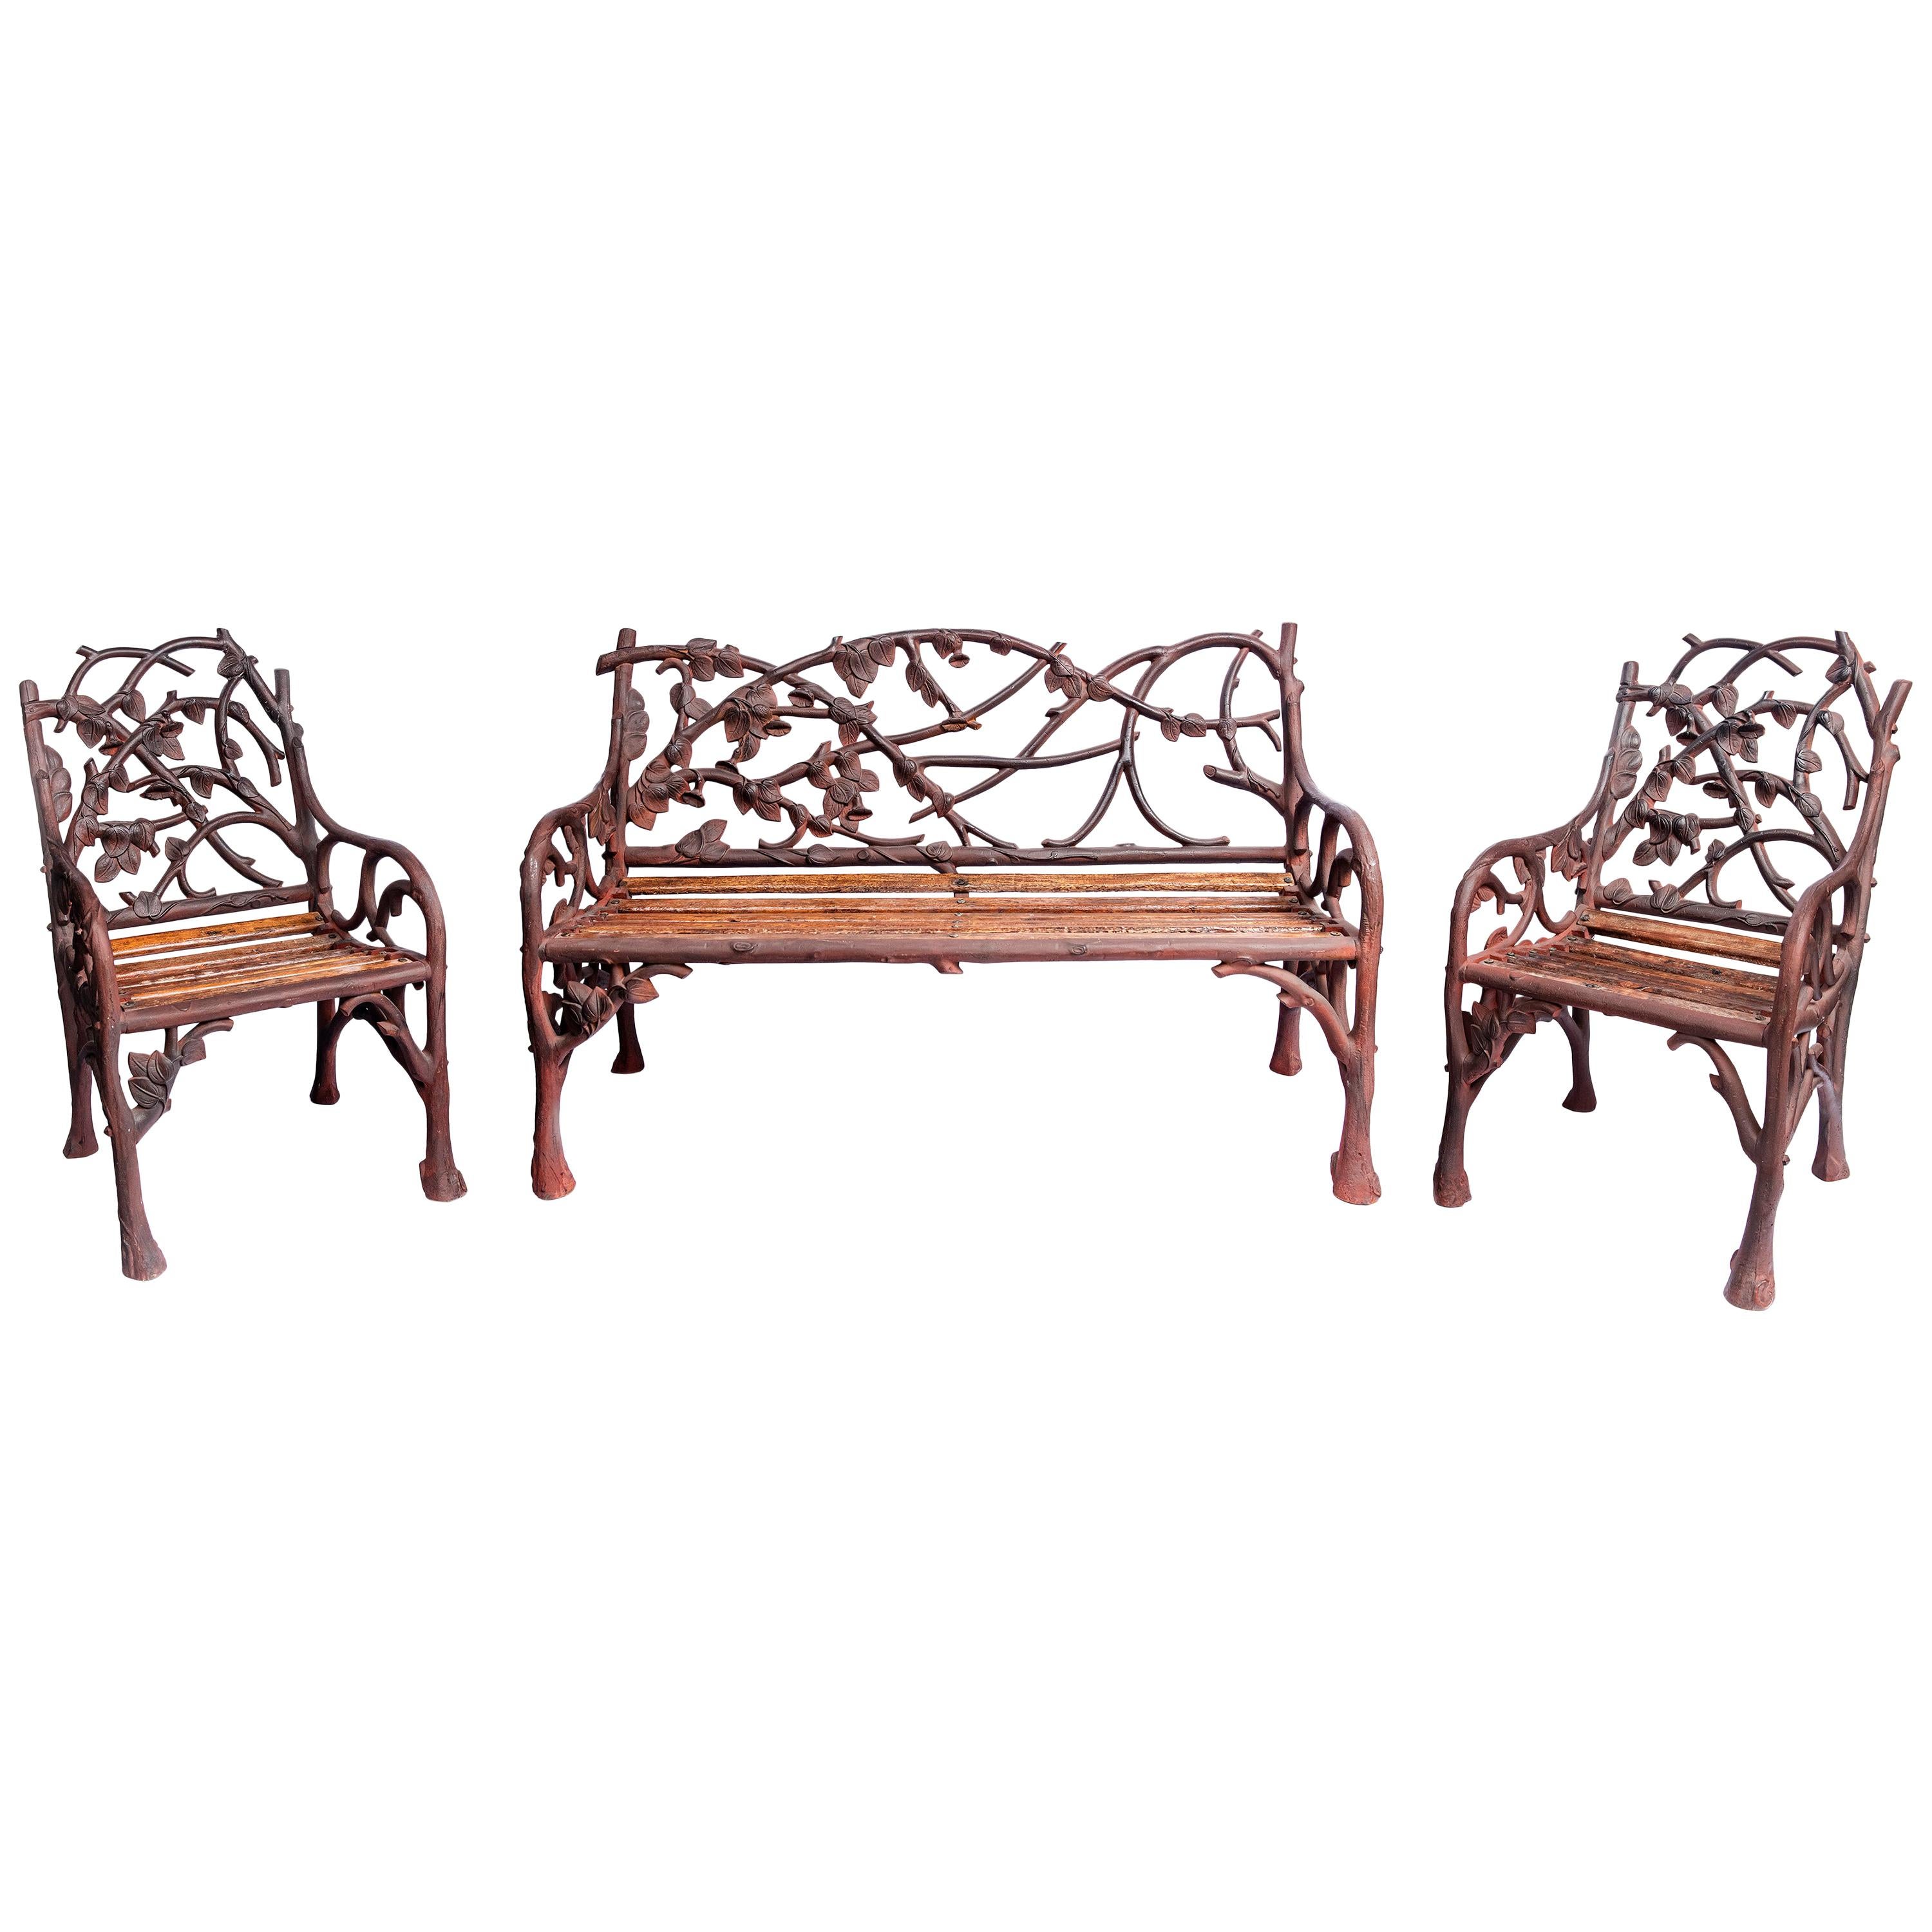 Cast Iron and Wood Garden Furniture Set, England, Late 19th Century